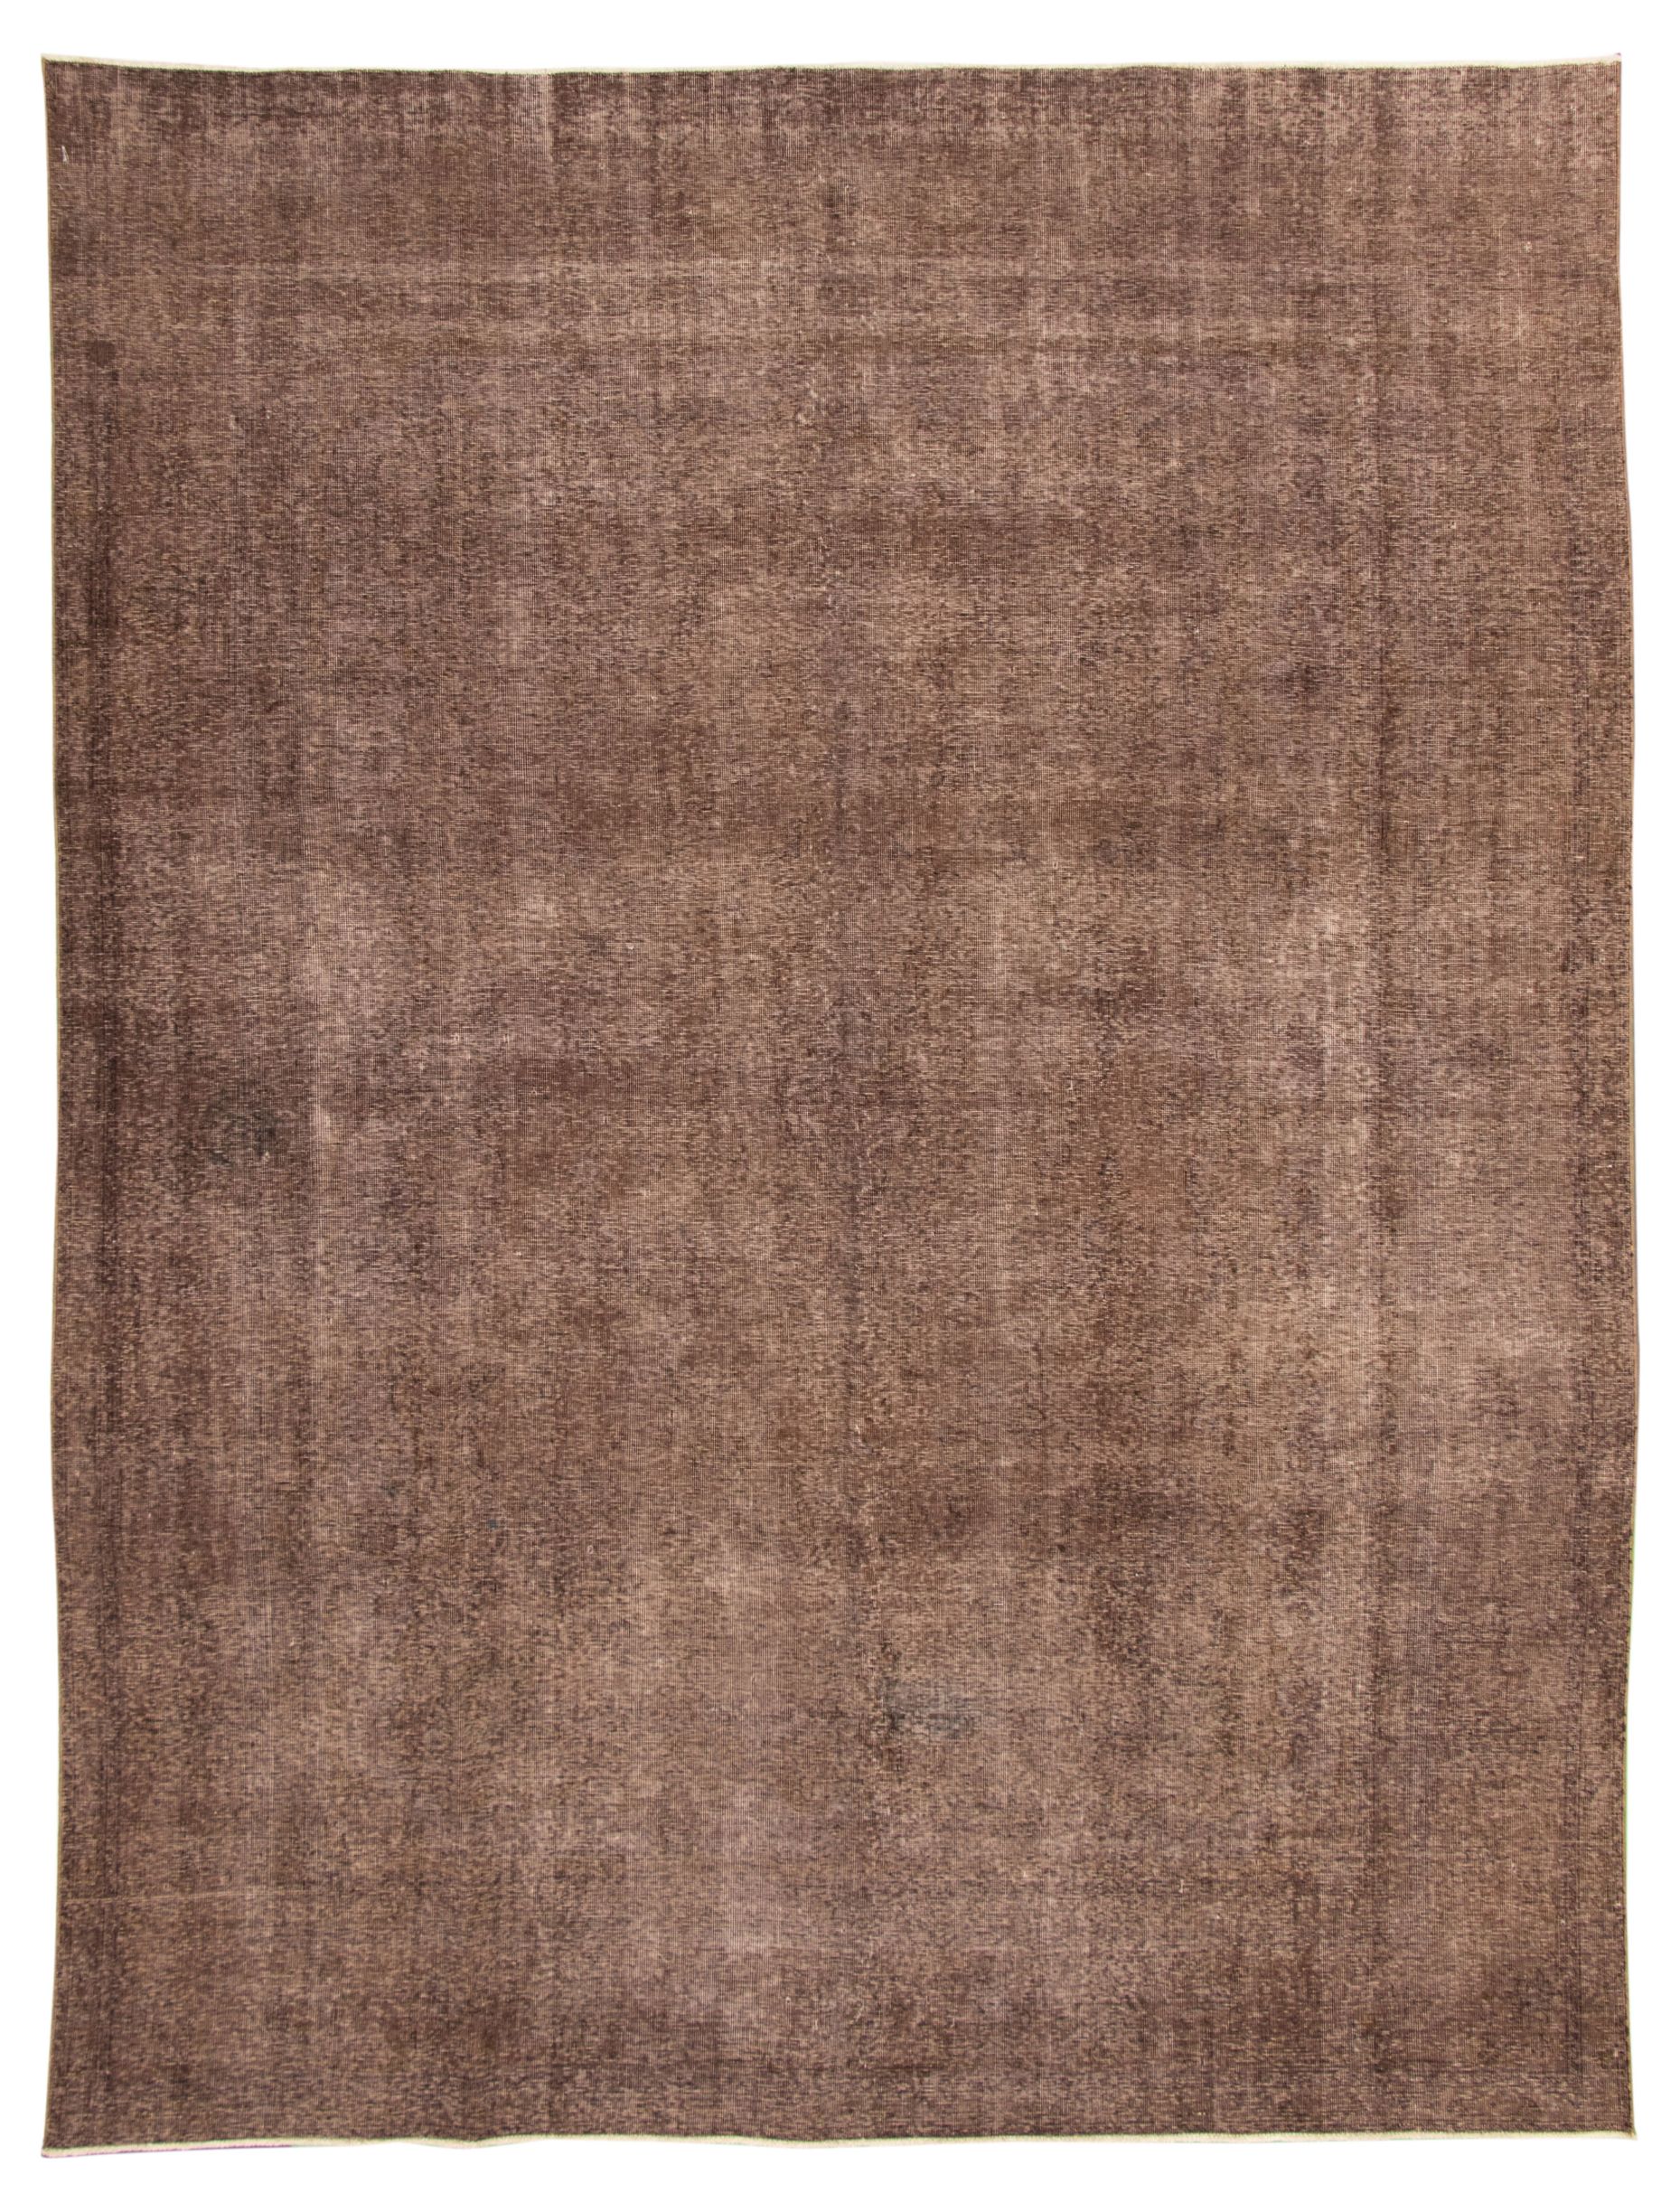 Hand-knotted Color Transition Dark Brown Wool Rug 9'7" x 12'6" Size: 9'7" x 12'6"  